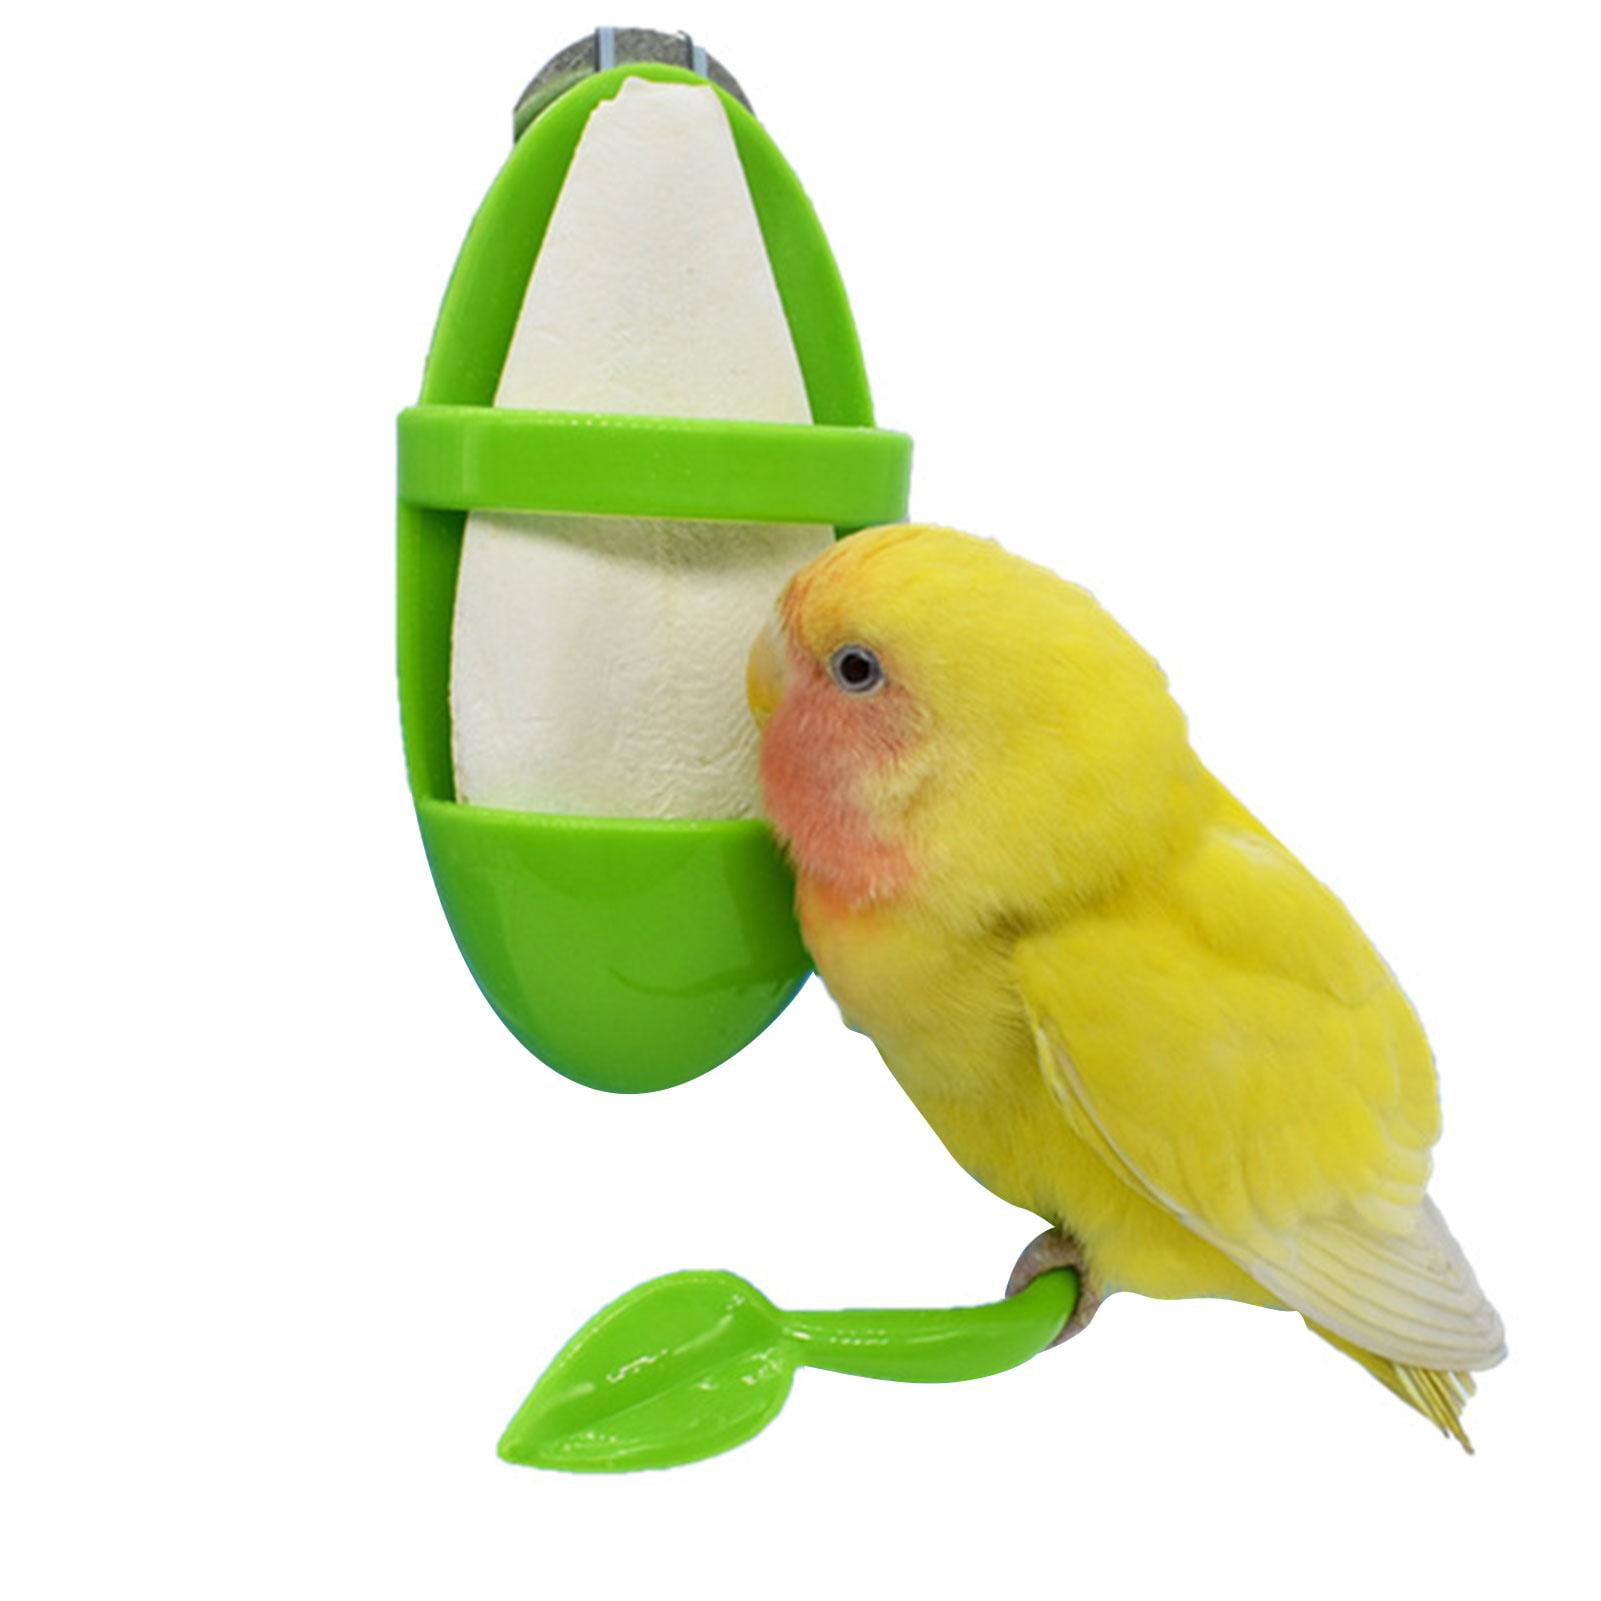 Birds Cage Feeders With Stand Pole,Bird Feeding Holder Vegetable Fruits Cuttlebone Holder For Parrot Budgies Parakeet Cockatiel Conure